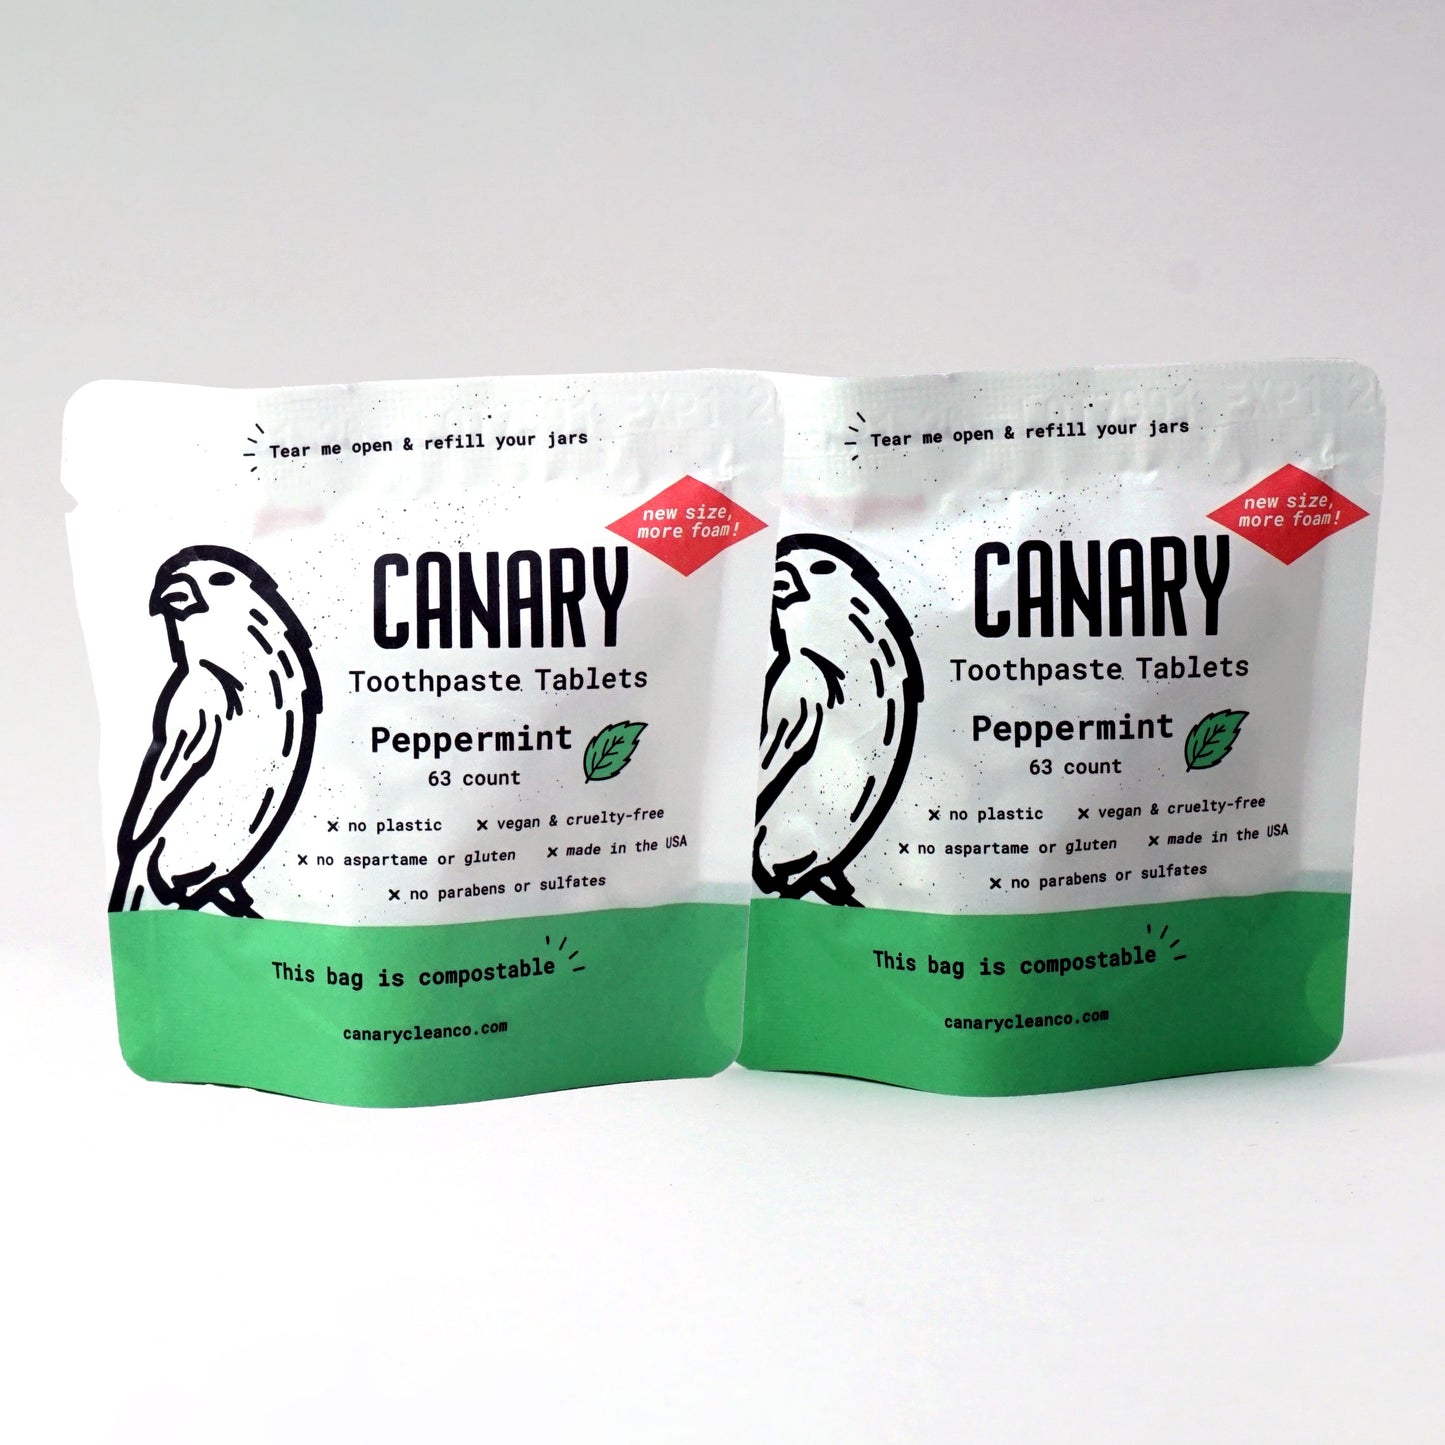 New and improved Canary Peppermint Toothpaste Tablets, front view of the 2-pack of the new 63ct compostable pouches